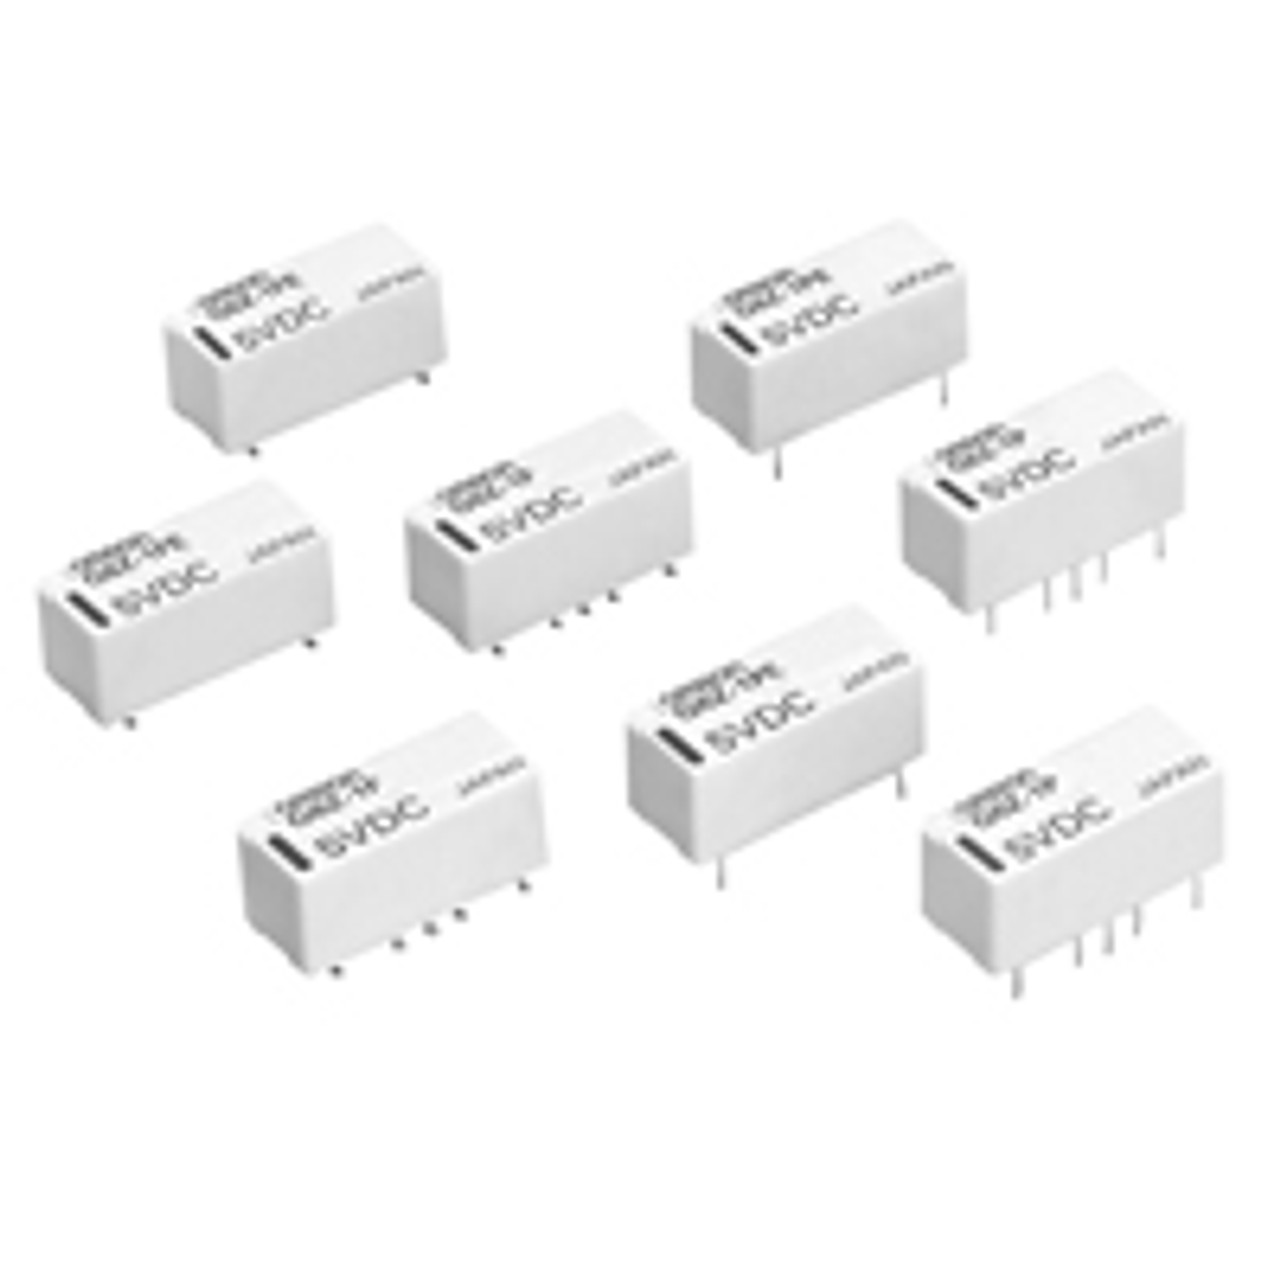 Omron G6Z-1FADC4.5 High Frequency Relays